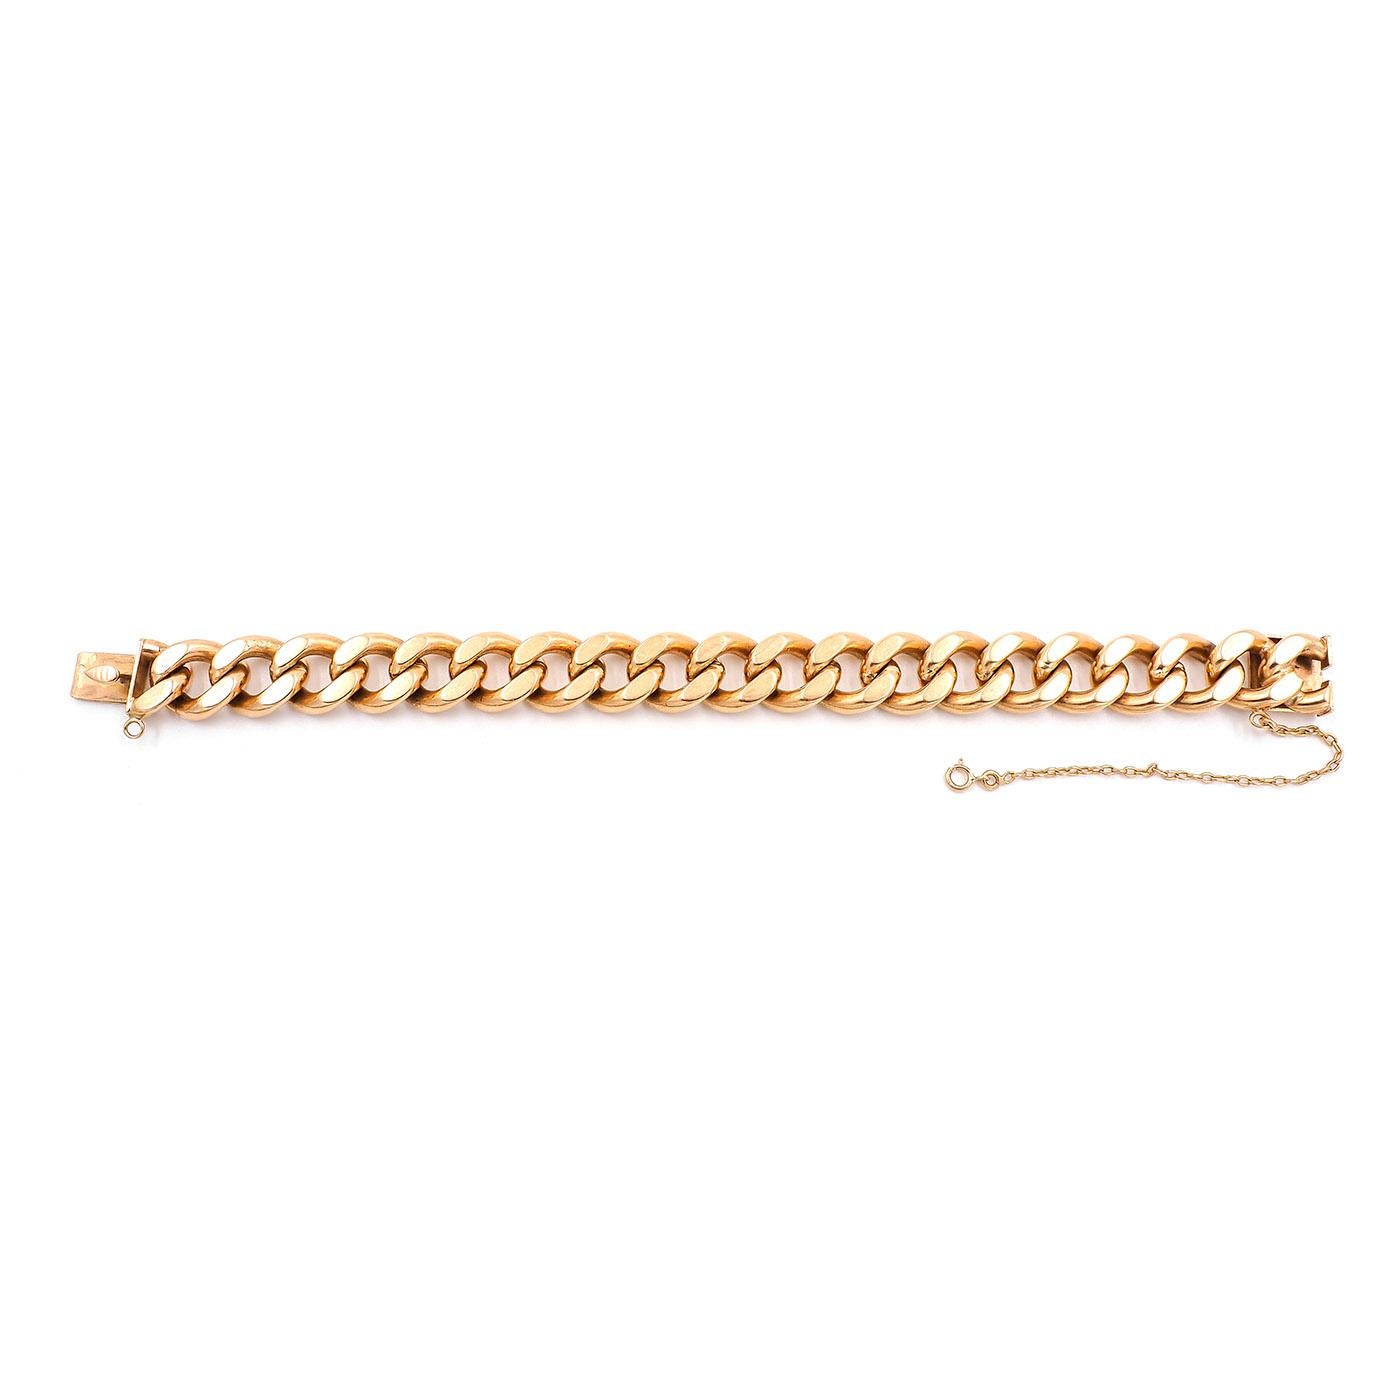 Vintage French Rounded Curb Link Gold Chain Bracelet composed of solid 18k yellow gold. With interlocking rounded curb links. 68.7 grams. Measures approximately 11.4 mm wide and 6.5